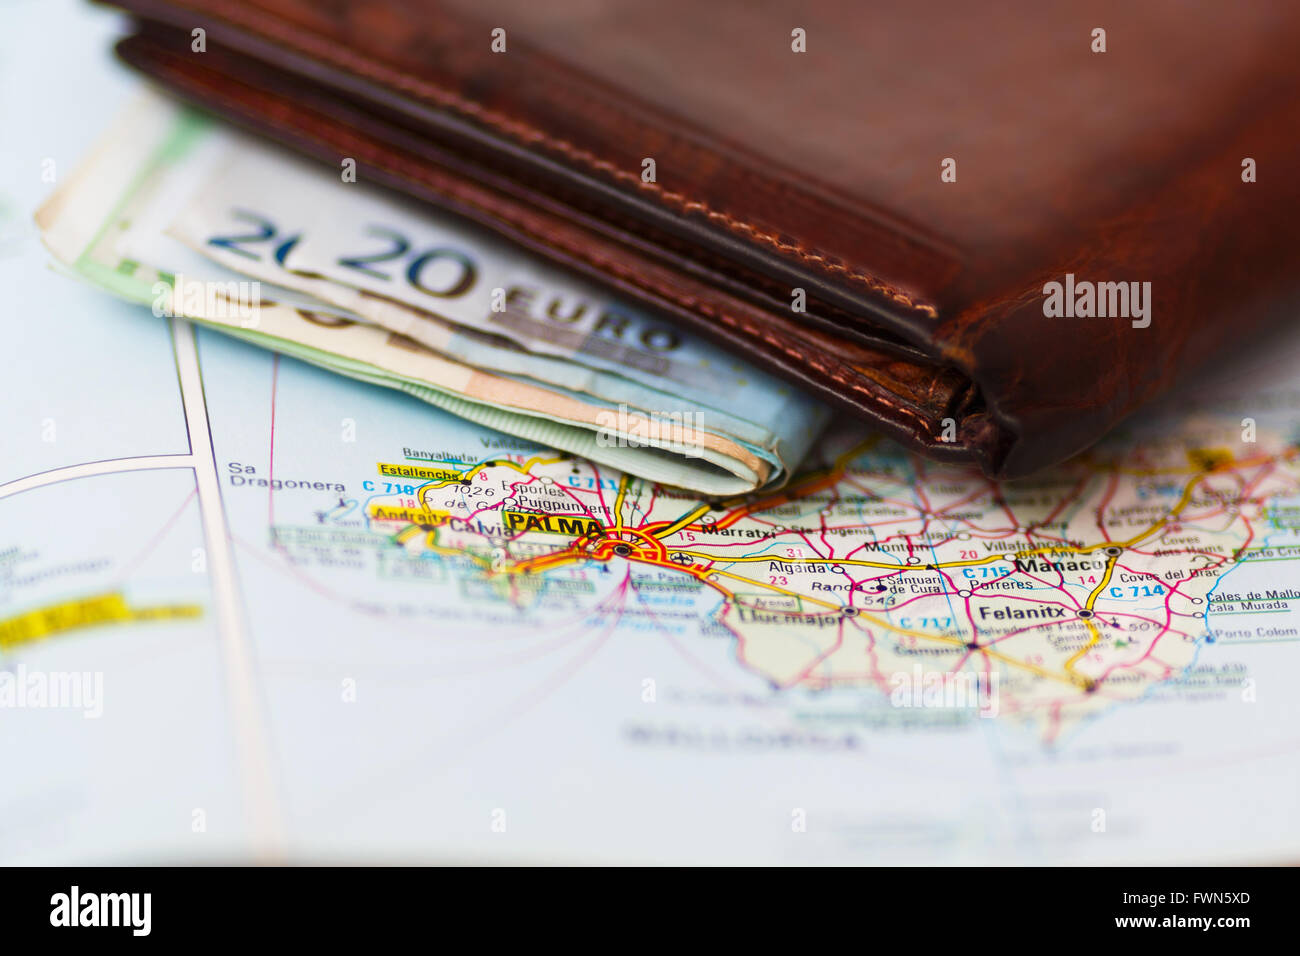 Euro banknotes inside wallet on a geographical map of Palma de Mallorca, Spain Stock Photo